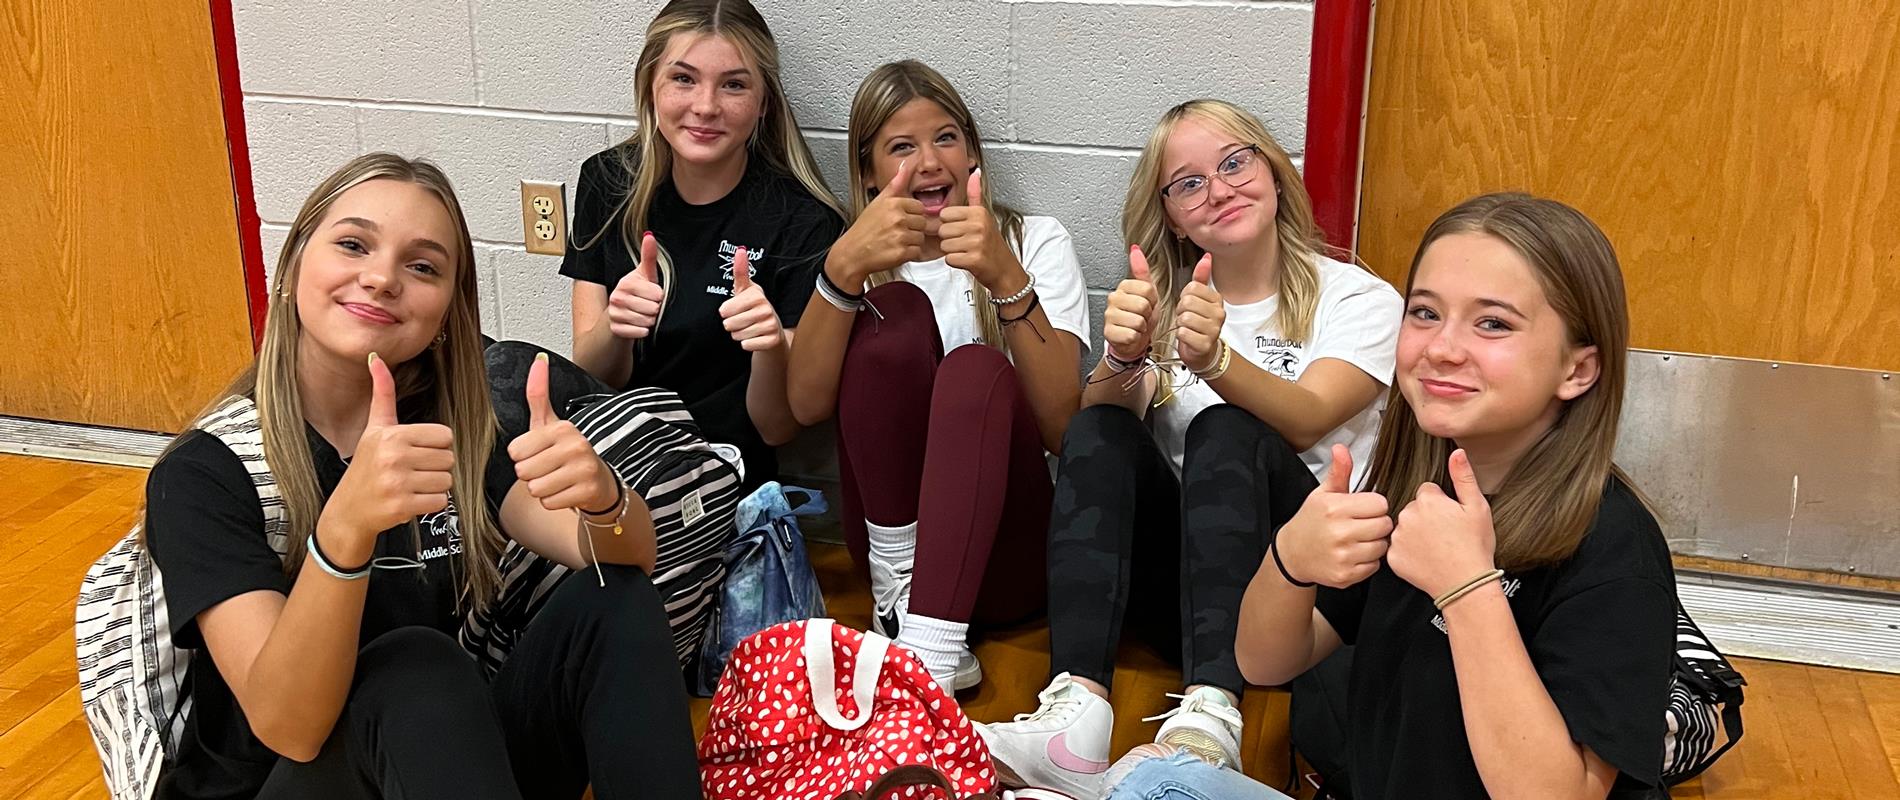 Group of girls sitting in the gym giving a thumbs up